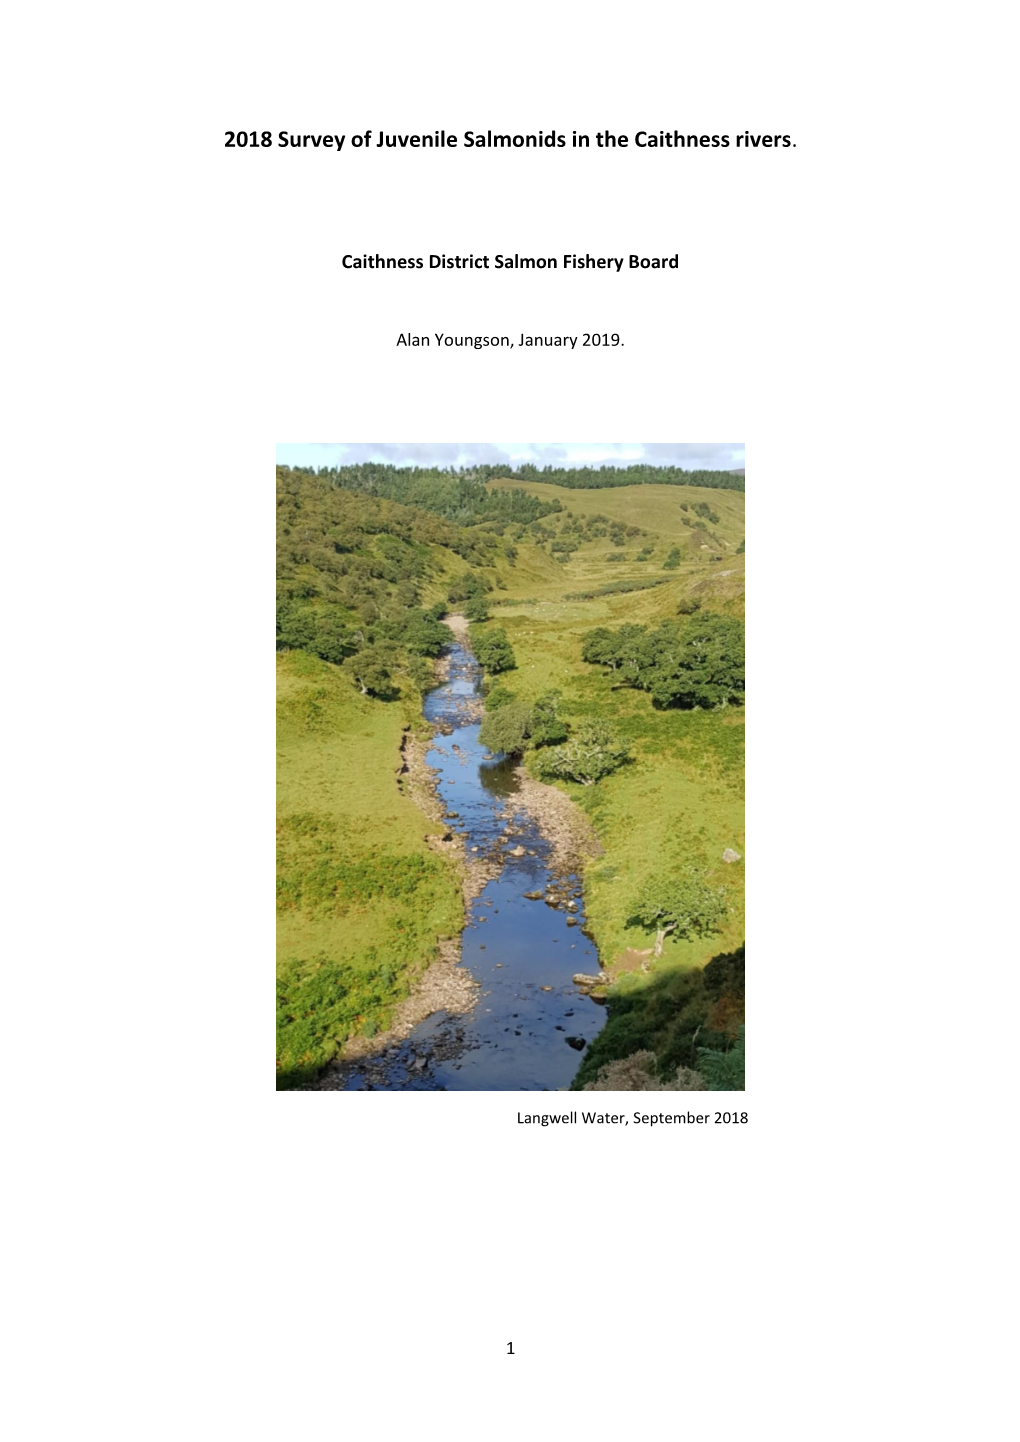 2018 Survey of Juvenile Salmonids in the Caithness Rivers